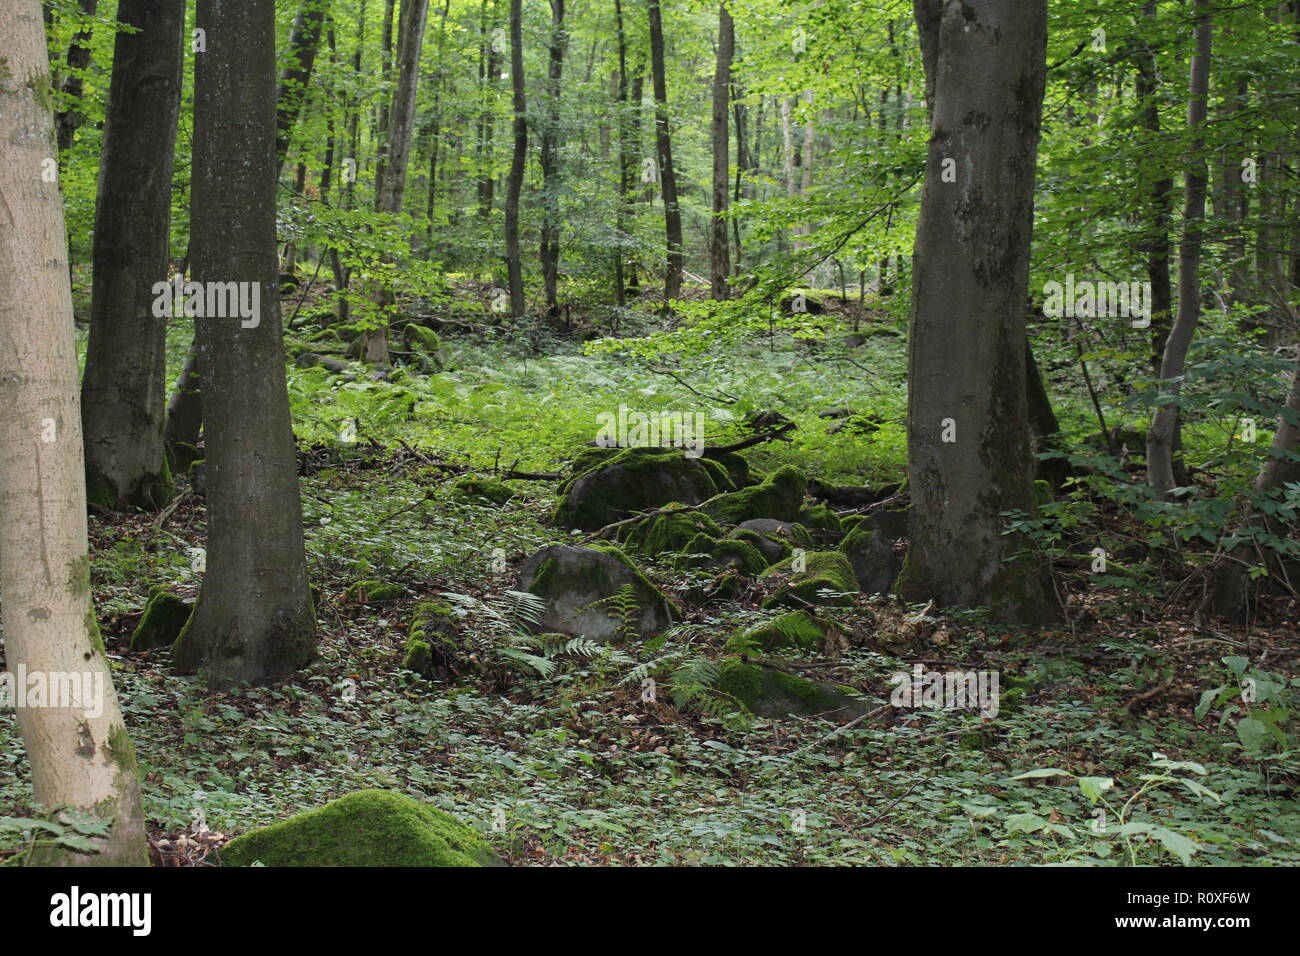 492 Moss Blanket Stock Photos - Free & Royalty-Free Stock Photos from  Dreamstime